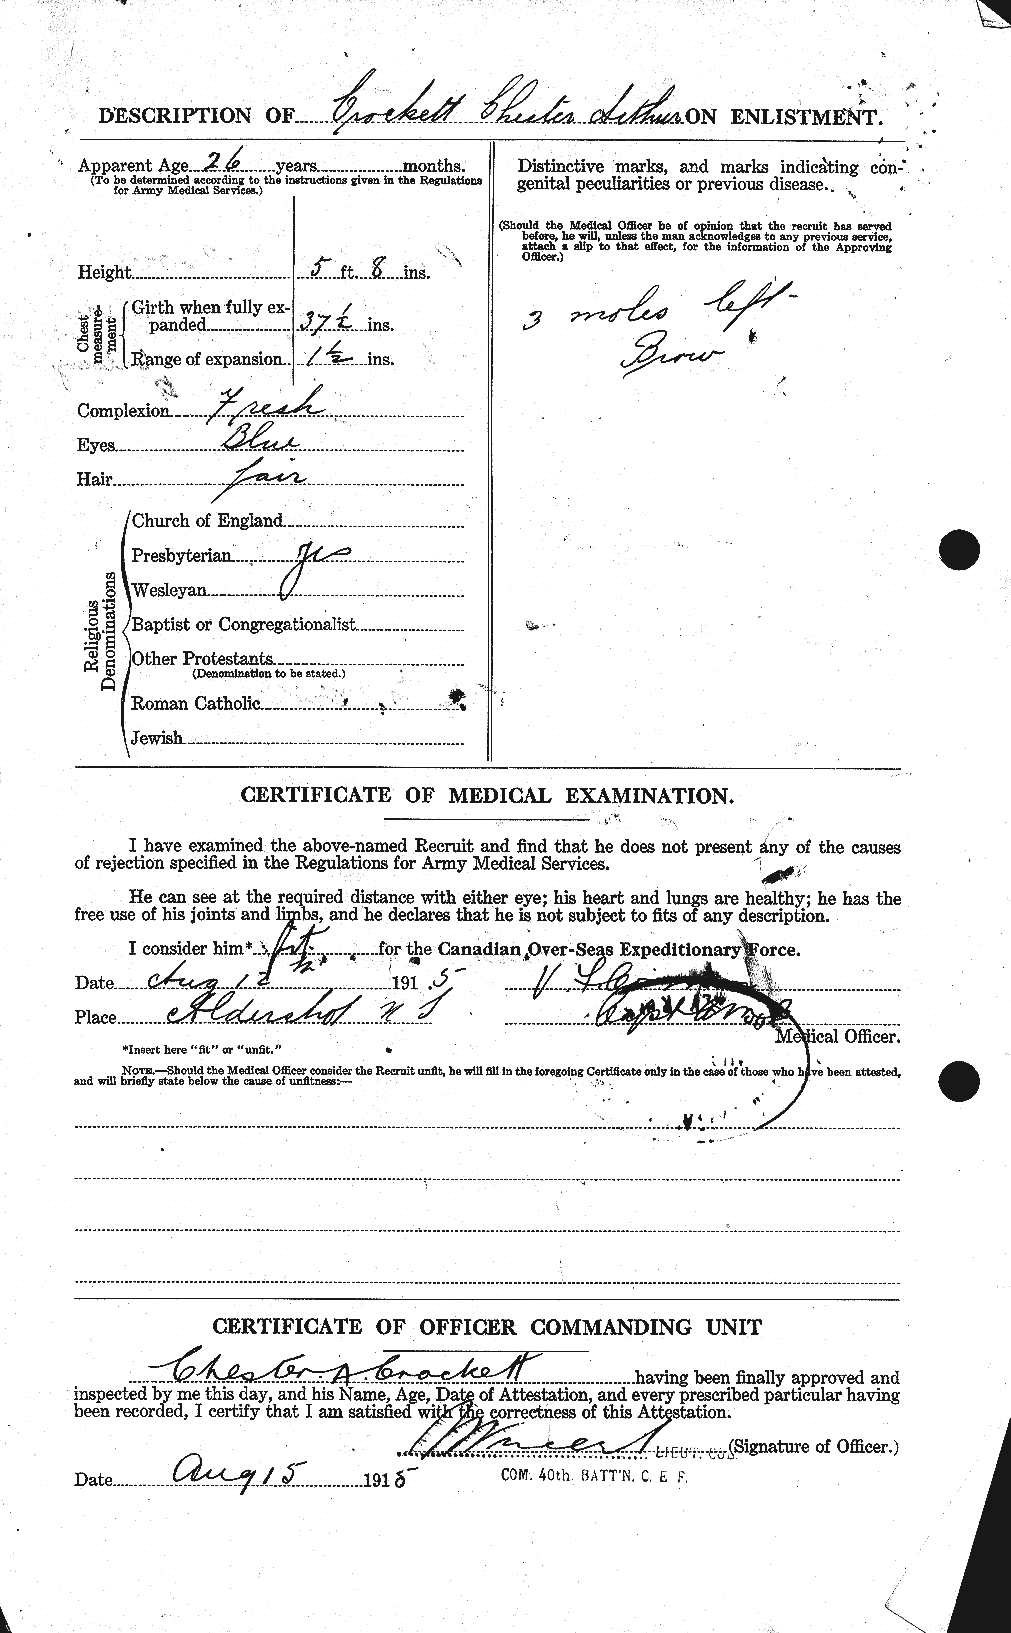 Personnel Records of the First World War - CEF 064720b